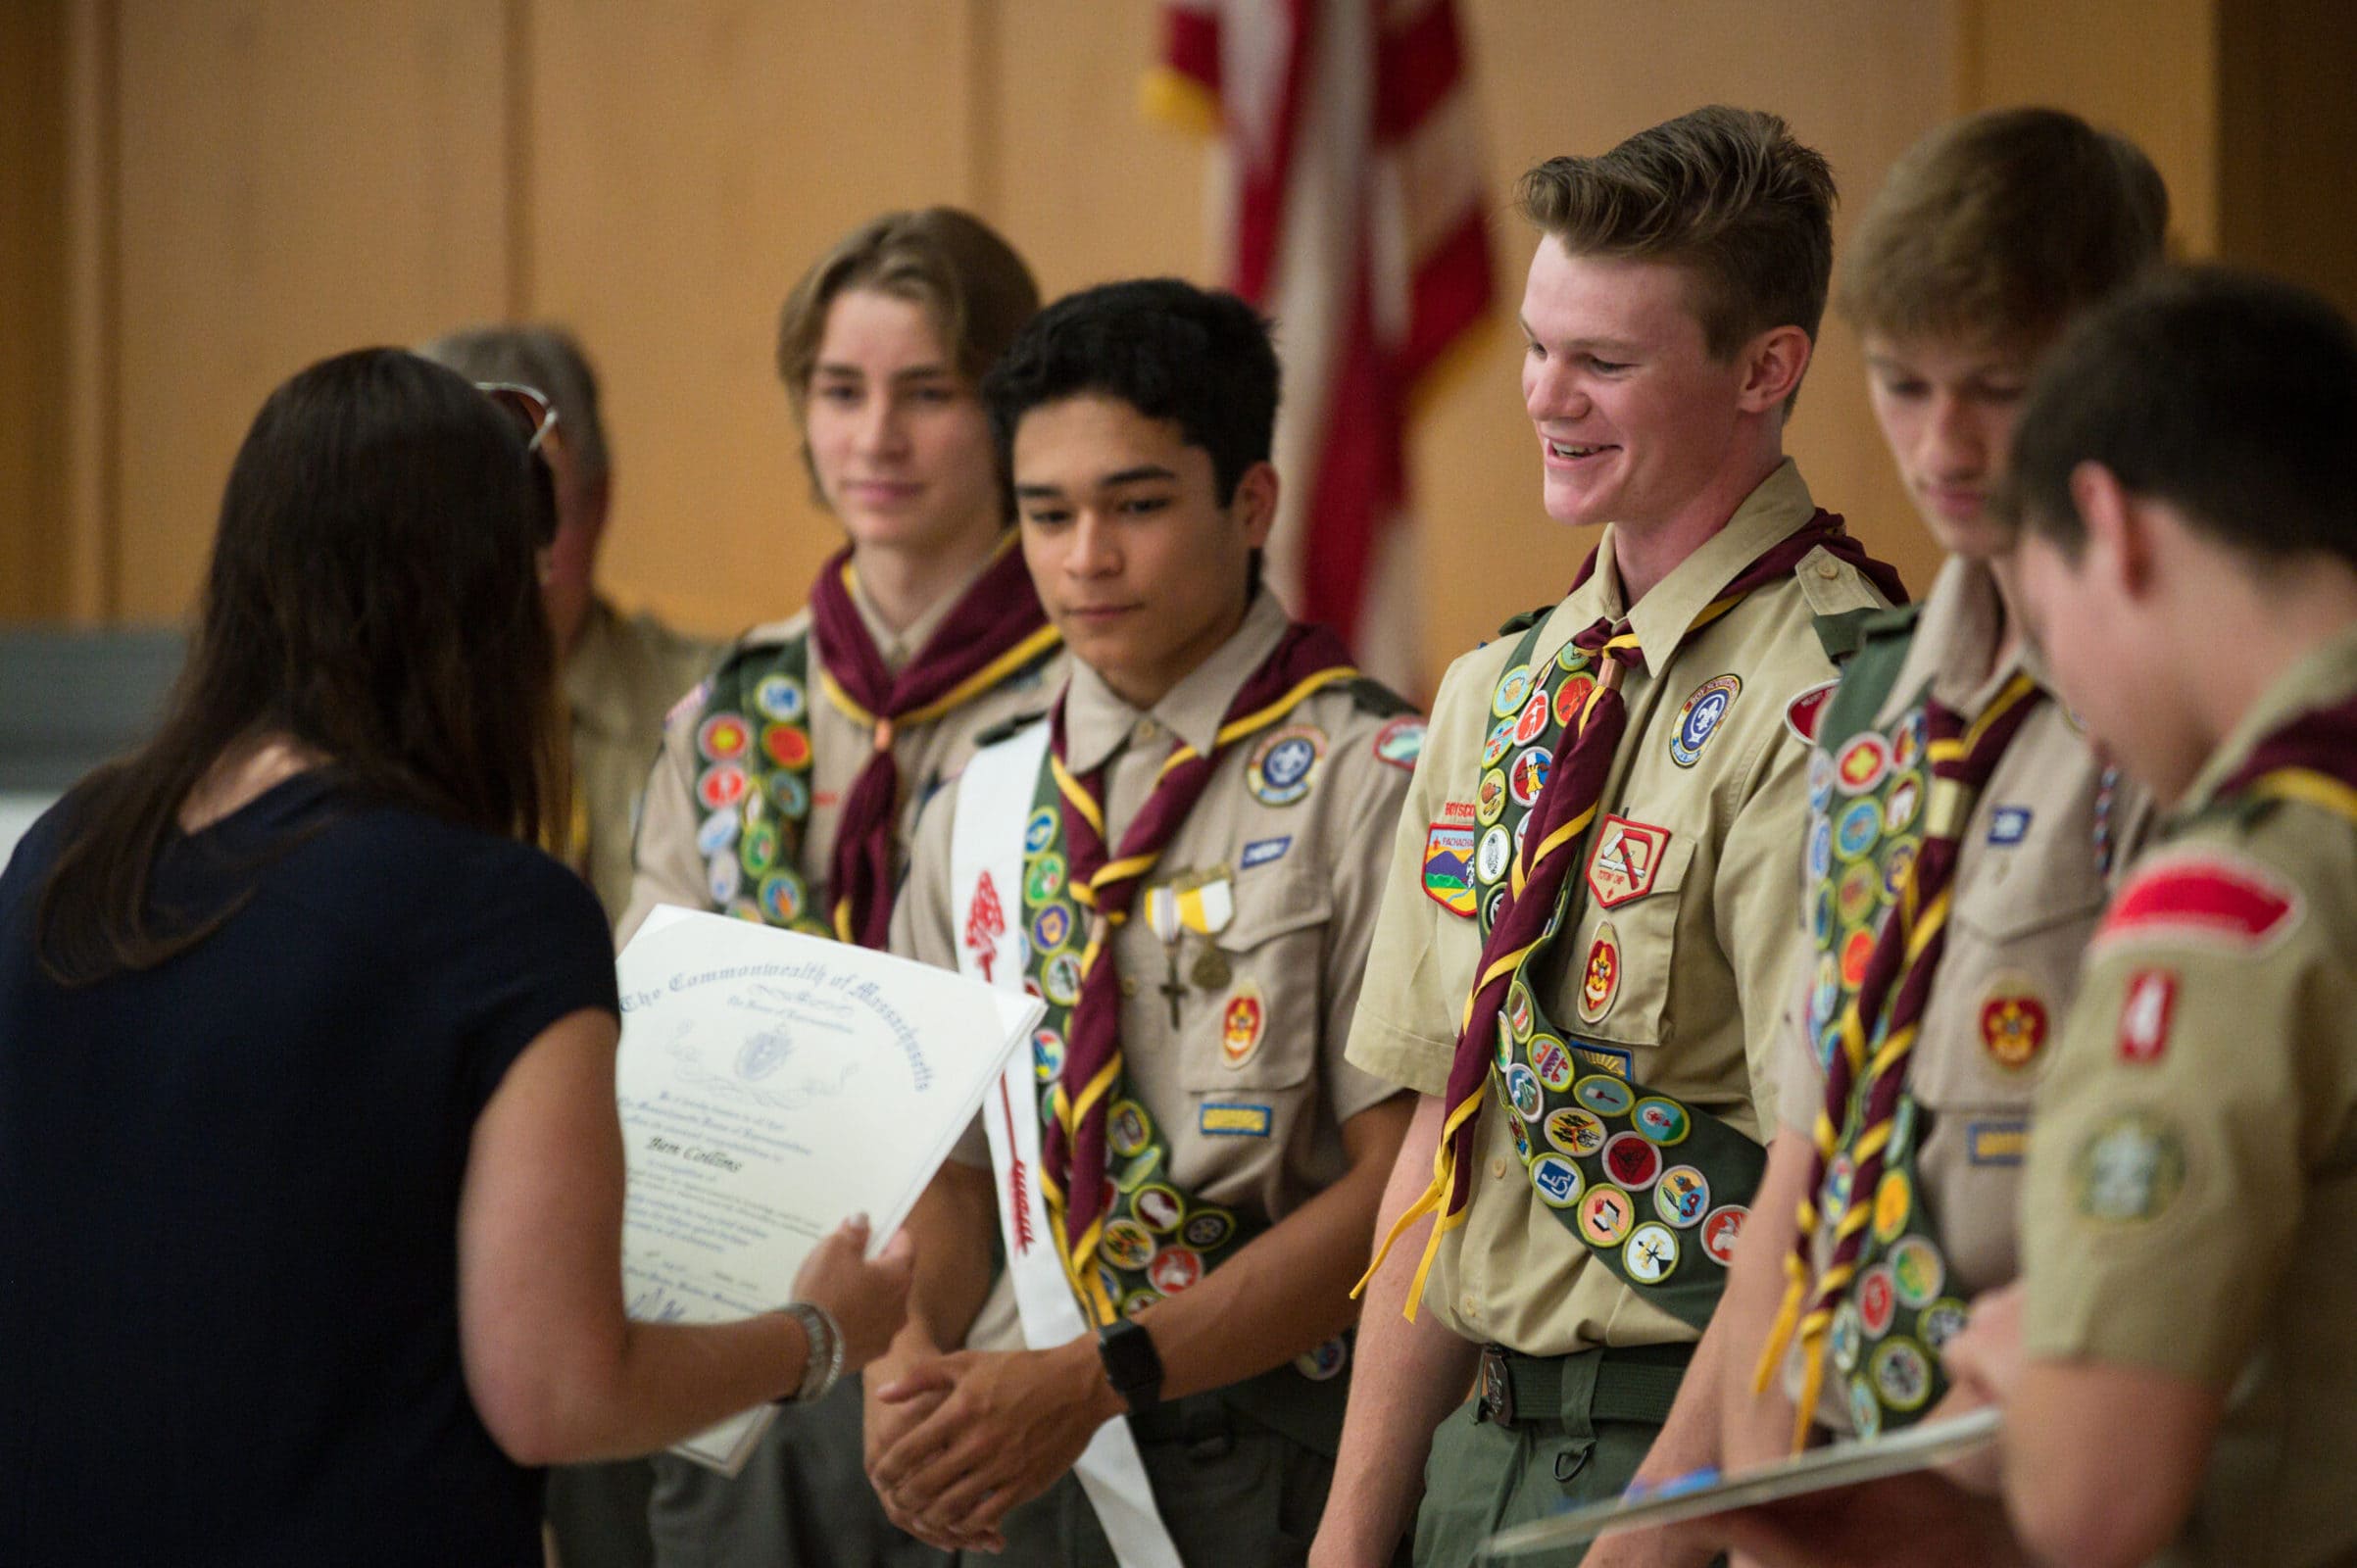 Shrewsbury Troop 4 celebrates Eagle Scouts at ceremony